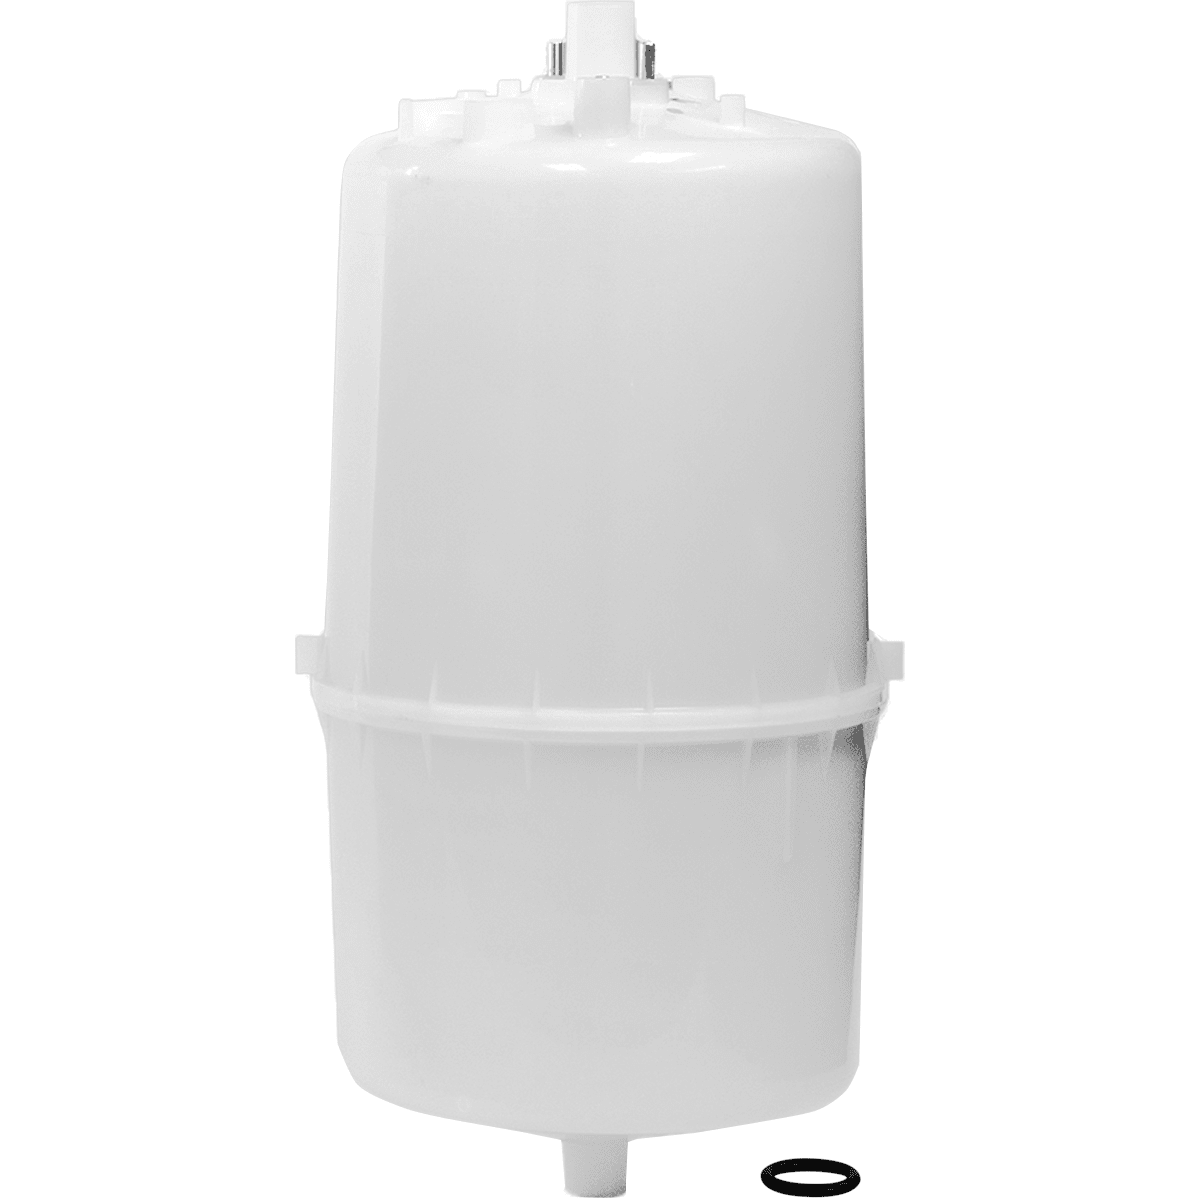 Aprilaire 309aac Steam Humidifier Cylinder (fits Nortec® 309)